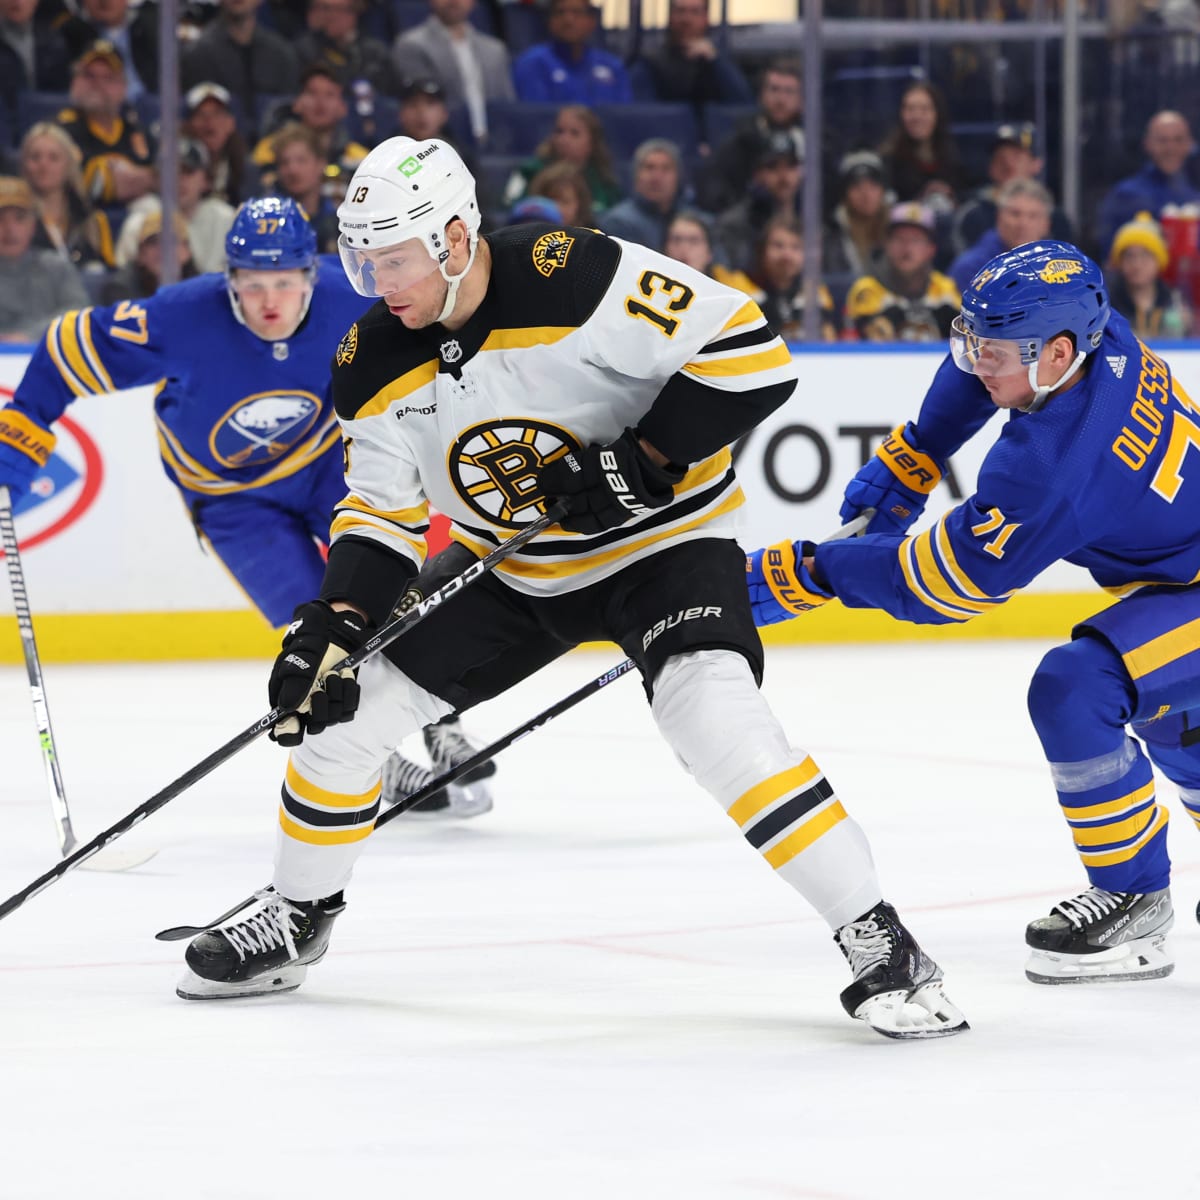 New Bruin Reilly Walsh believes he is ready for his NHL